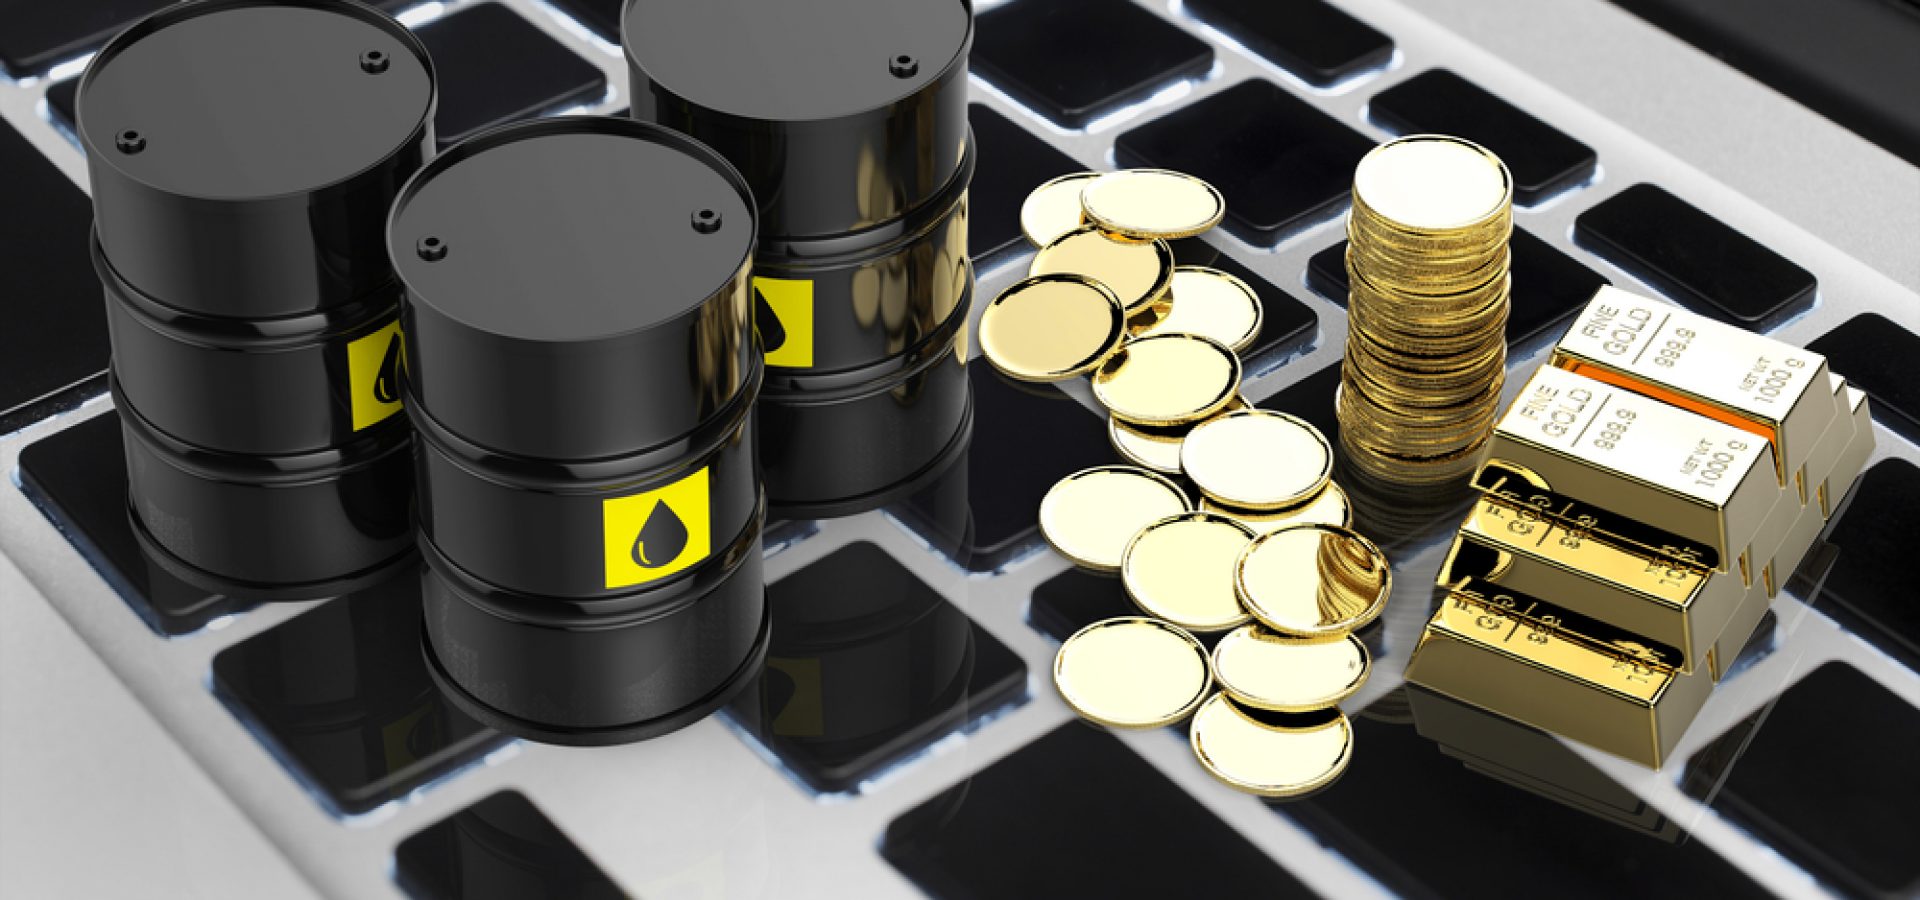 Wibest – Petroleum and oil: Oil barrels, gold bars, and golden coins on top of a keyboard.